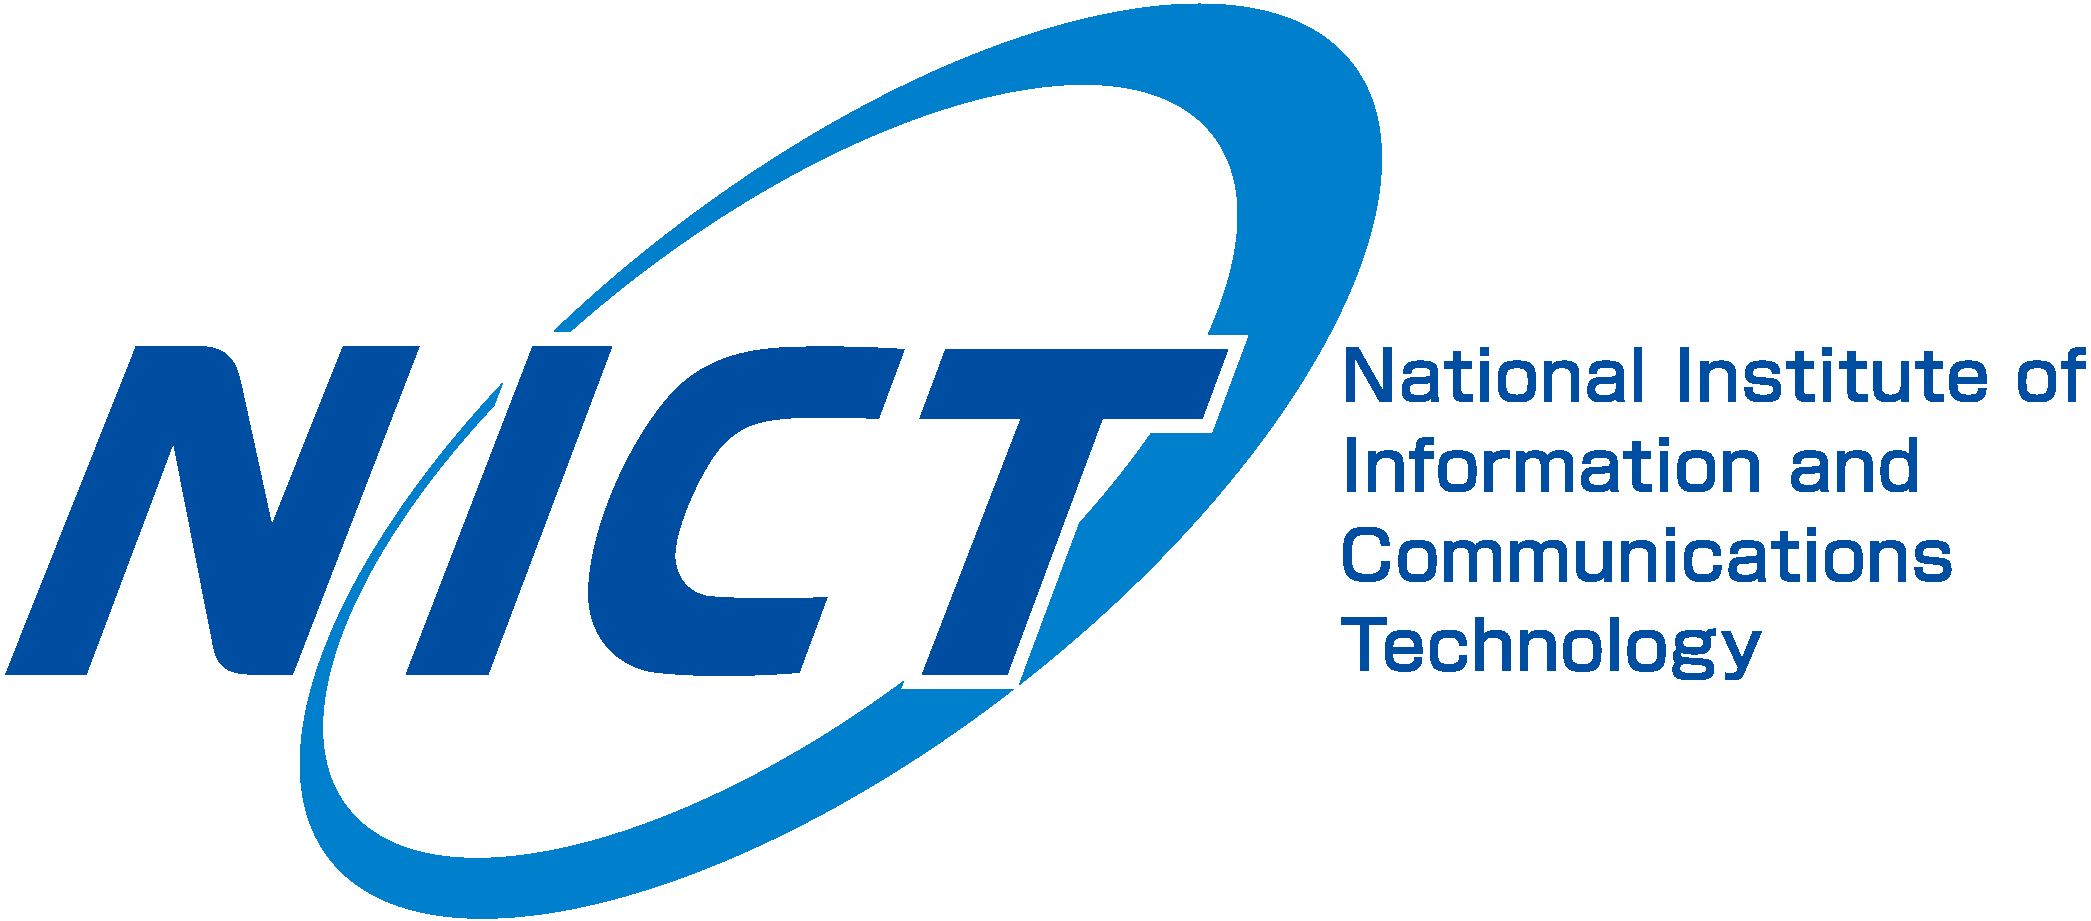 National Institute of Information and Communications Technology